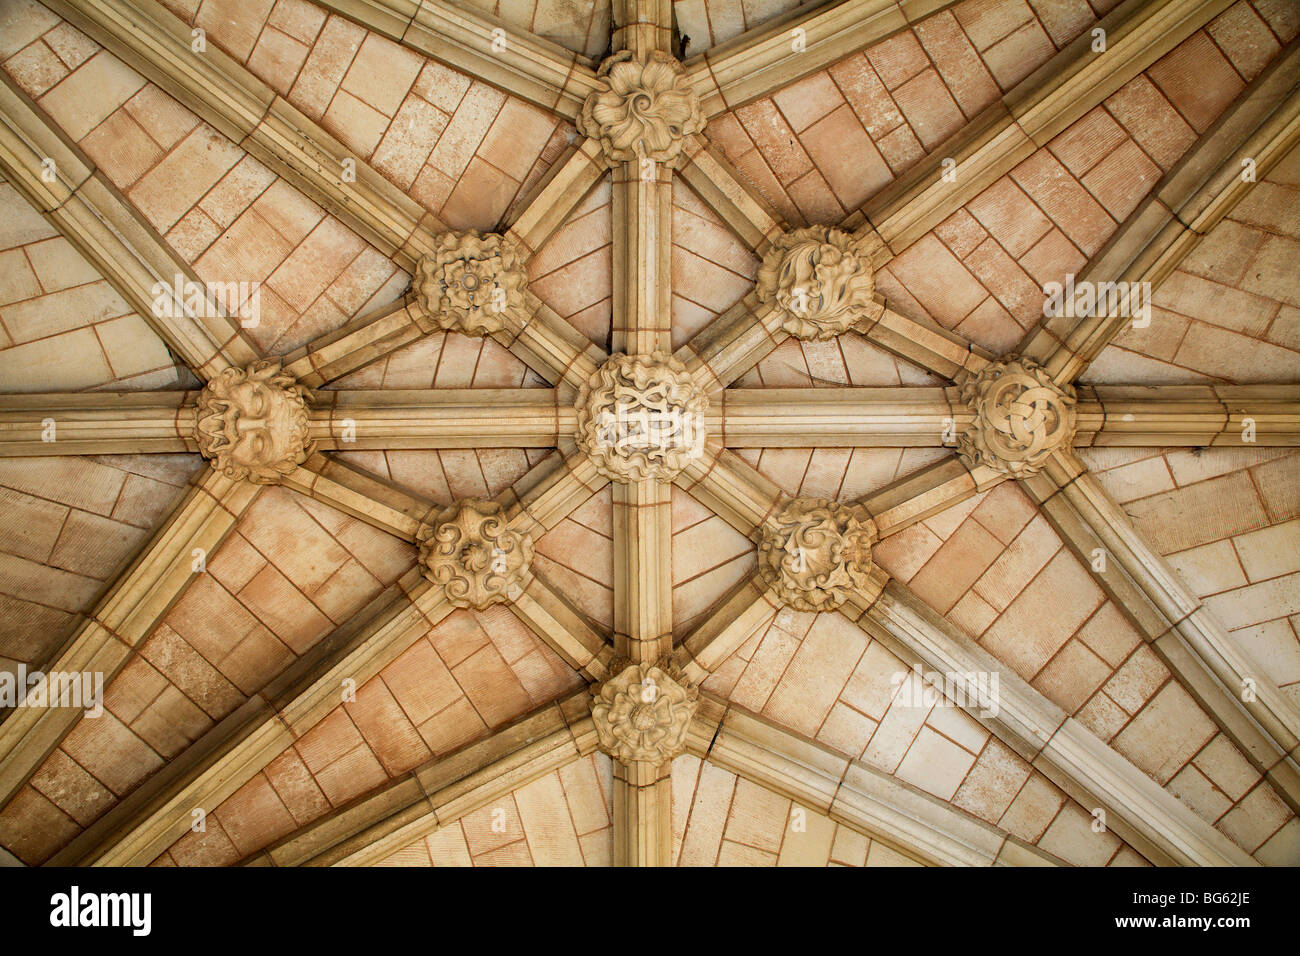 London - gothic Westminster hall - detail Stock Photo